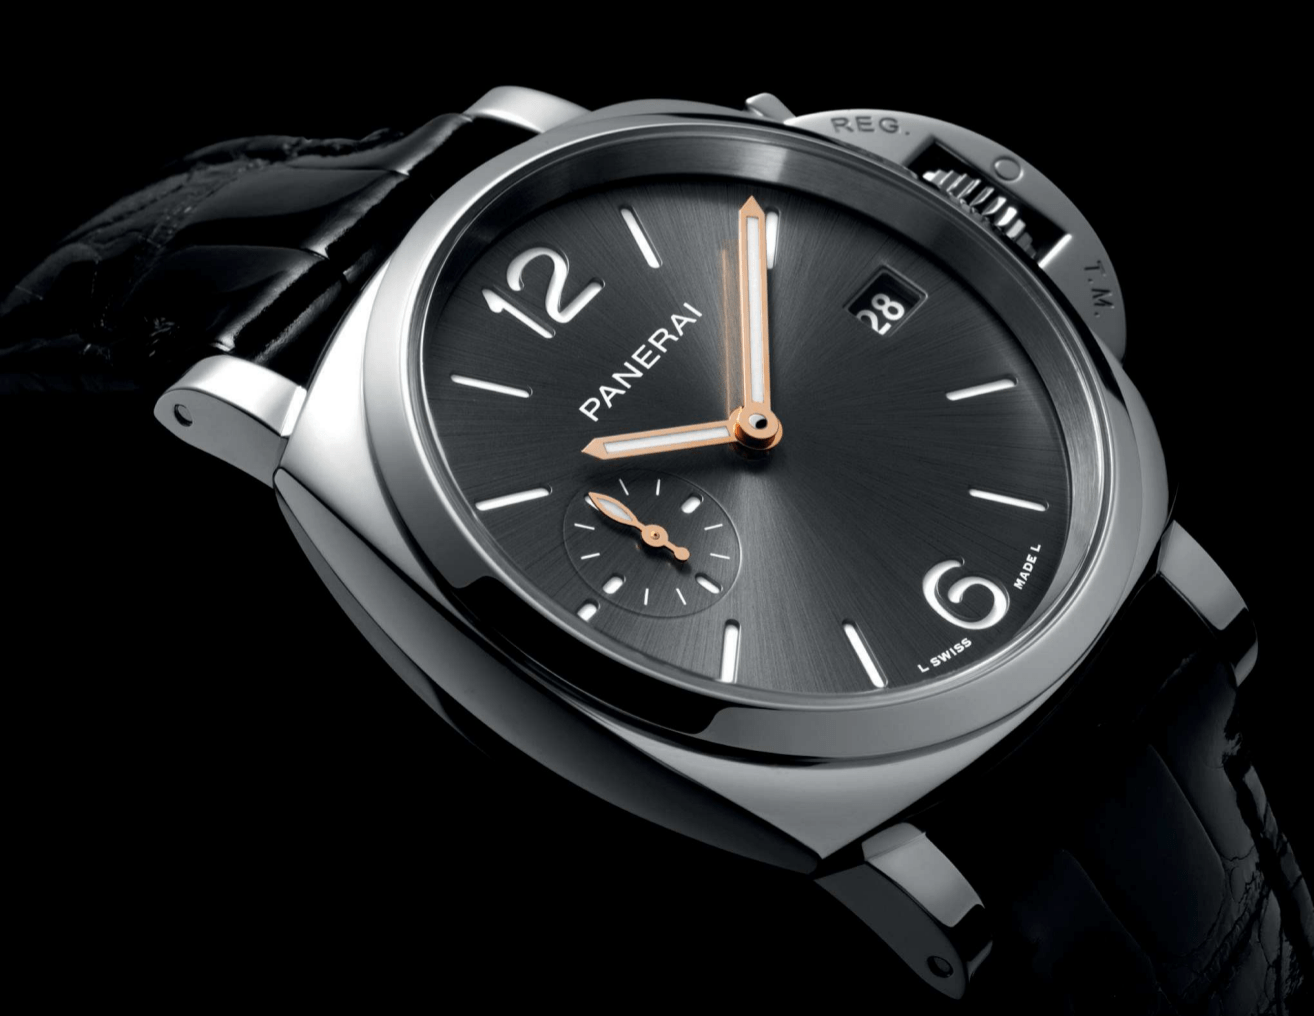 Introducing two new expressions of the Panerai Luminor Due